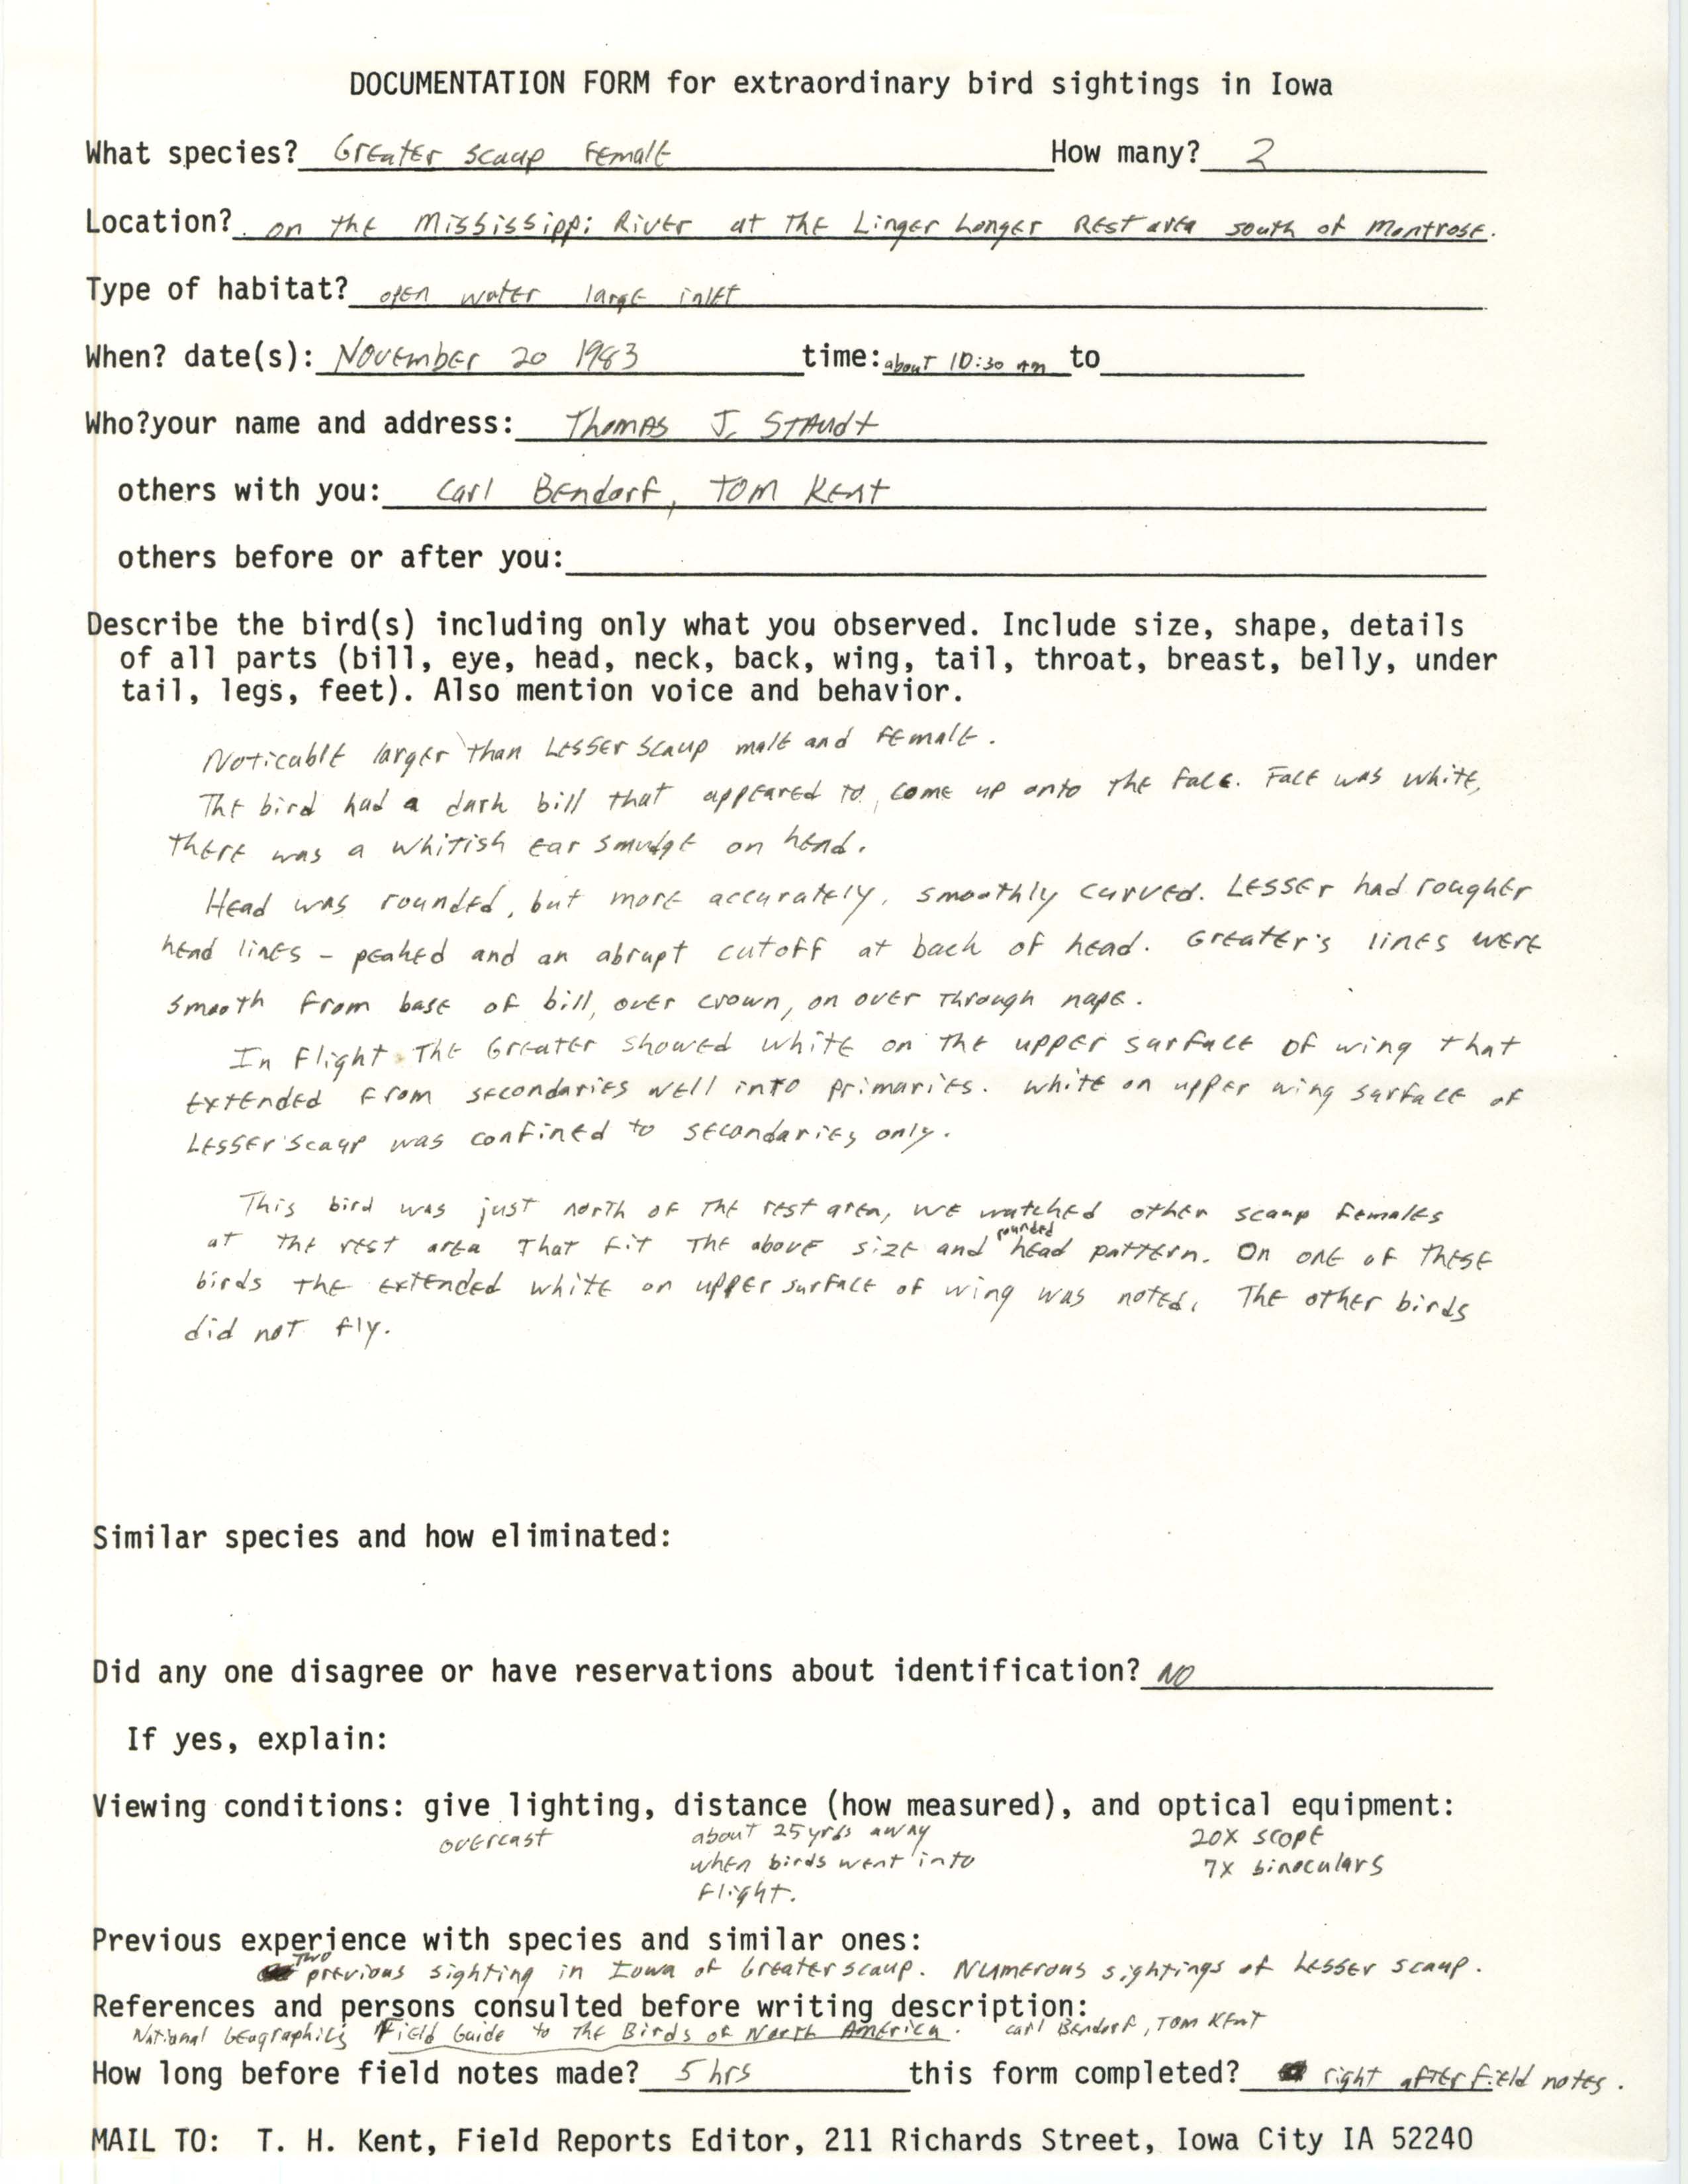 Rare bird documentation form for Greater Scaup south of Montrose, 1983